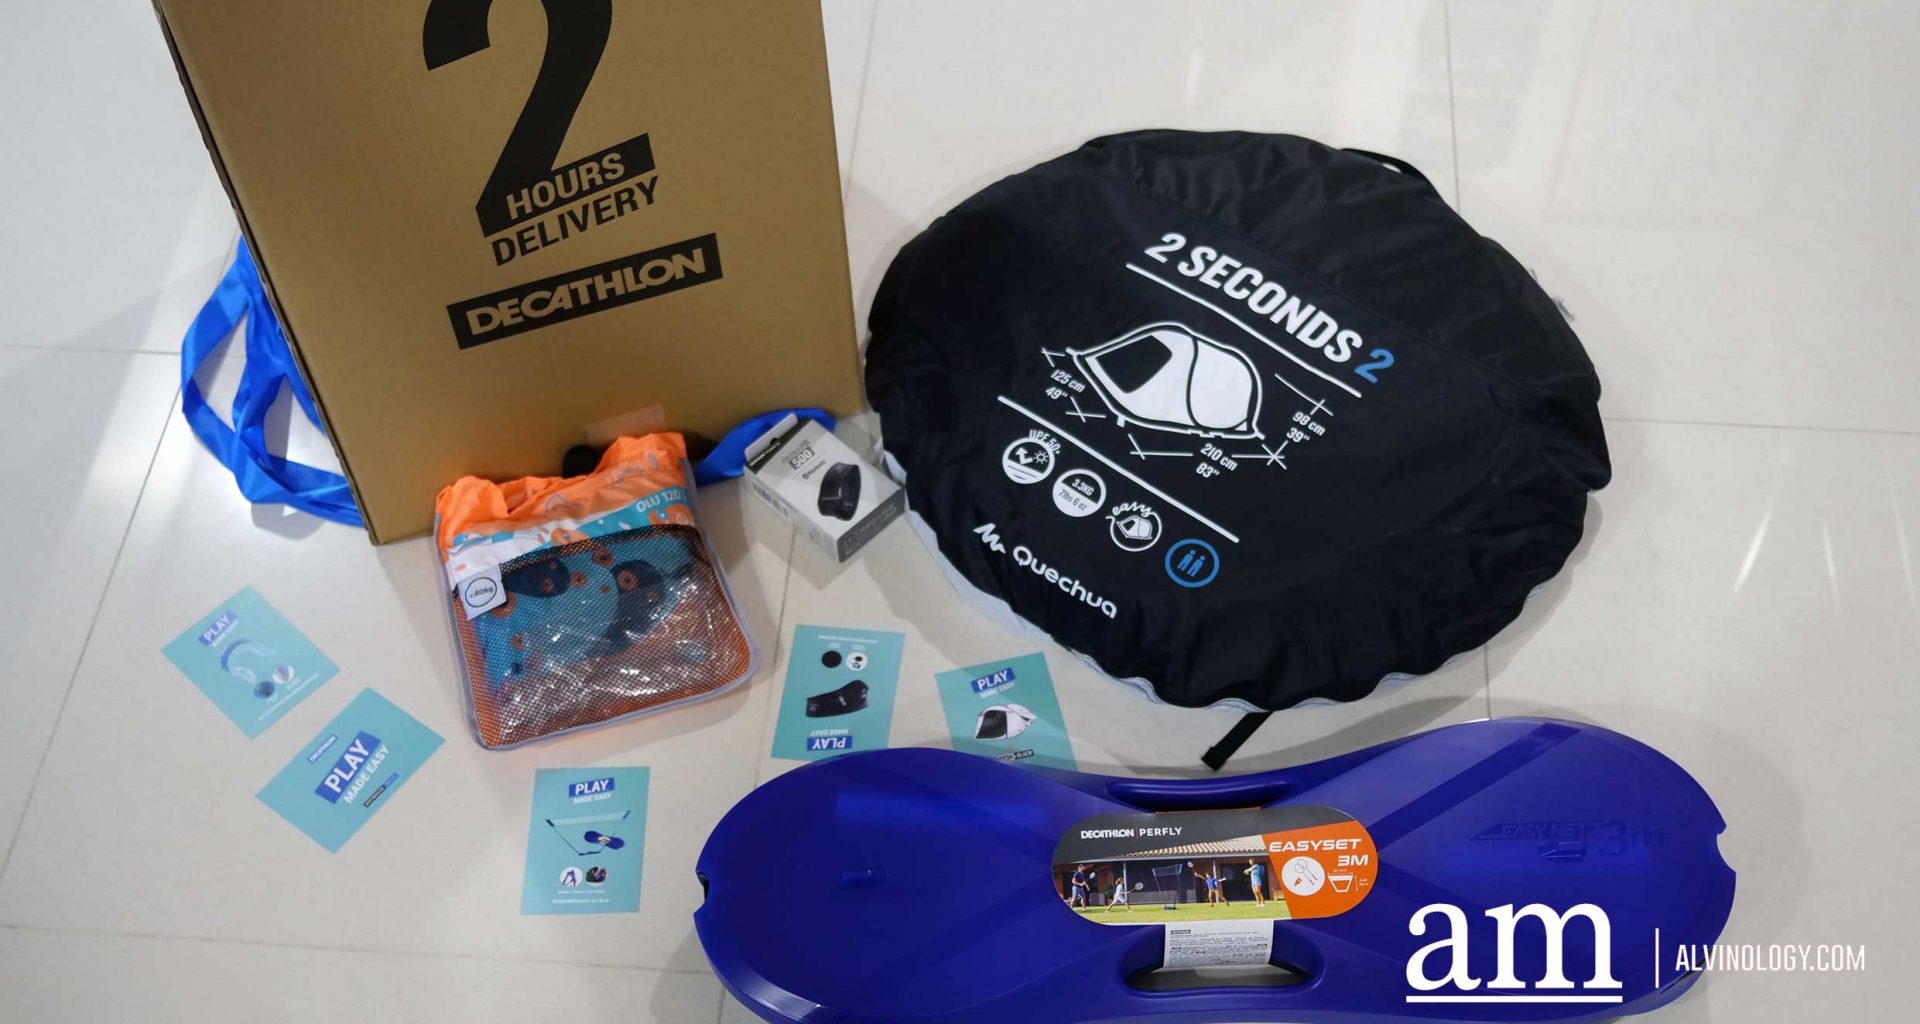 [Review] Play Made Easy with 4 innovative products from Decathlon - Alvinology